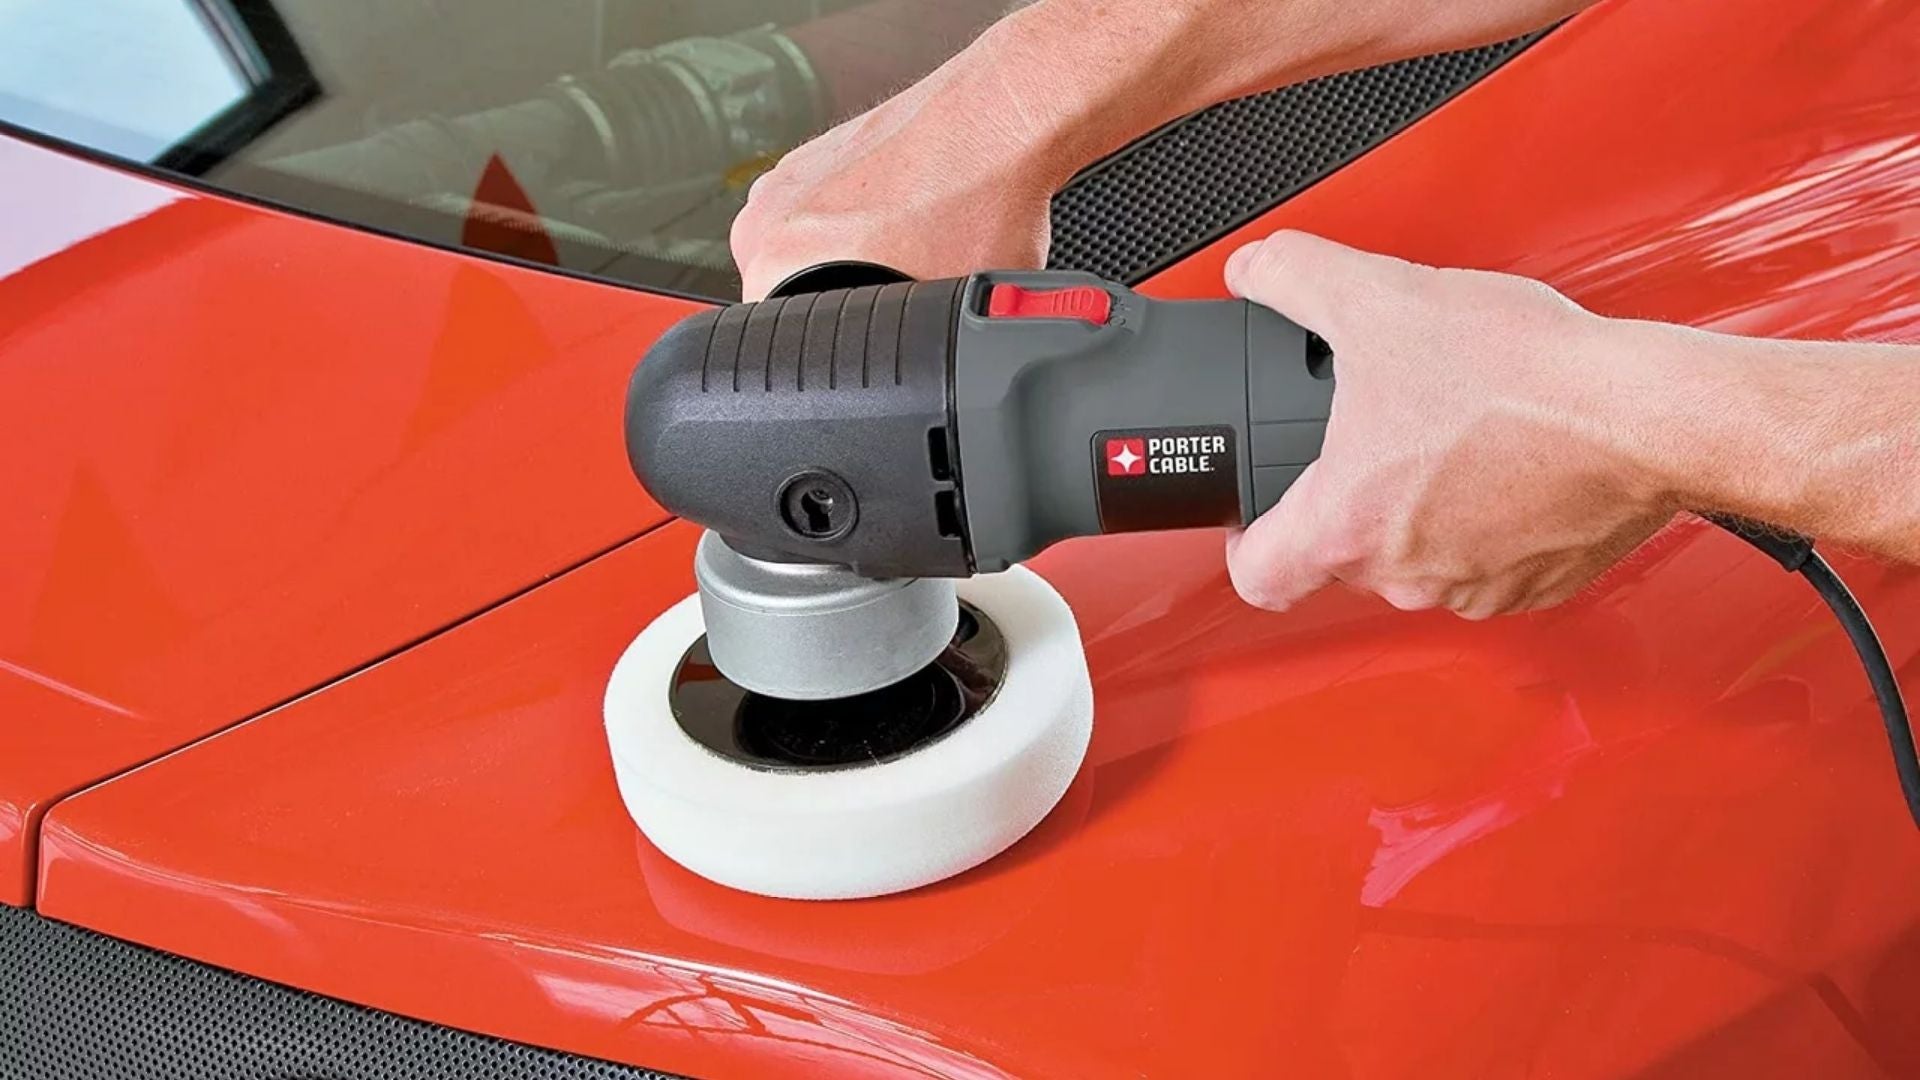 Best Car Buffer To Keep Your Car Looking Brand New